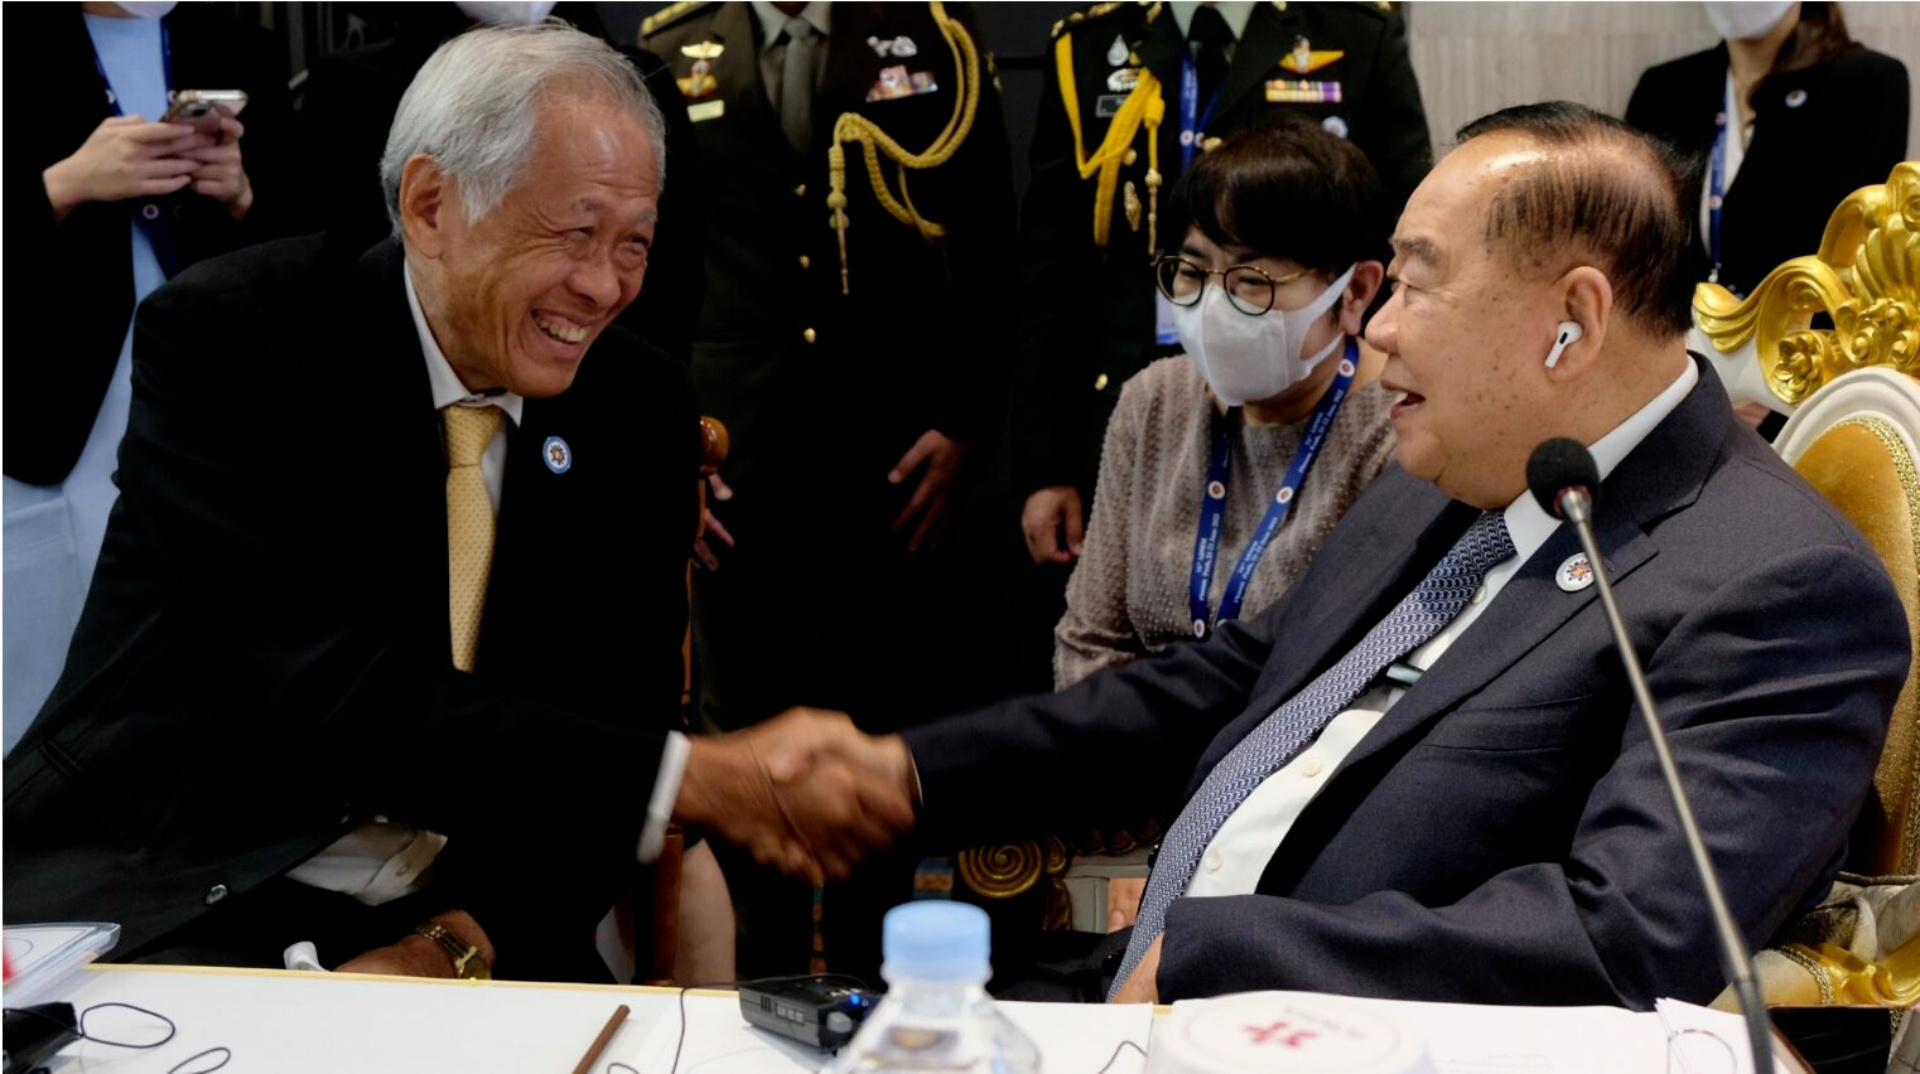 Dr Ng (left) and GEN Prawit Wongsuwon, Thailand's Deputy Prime Minister (right) at the 16th ADMM.